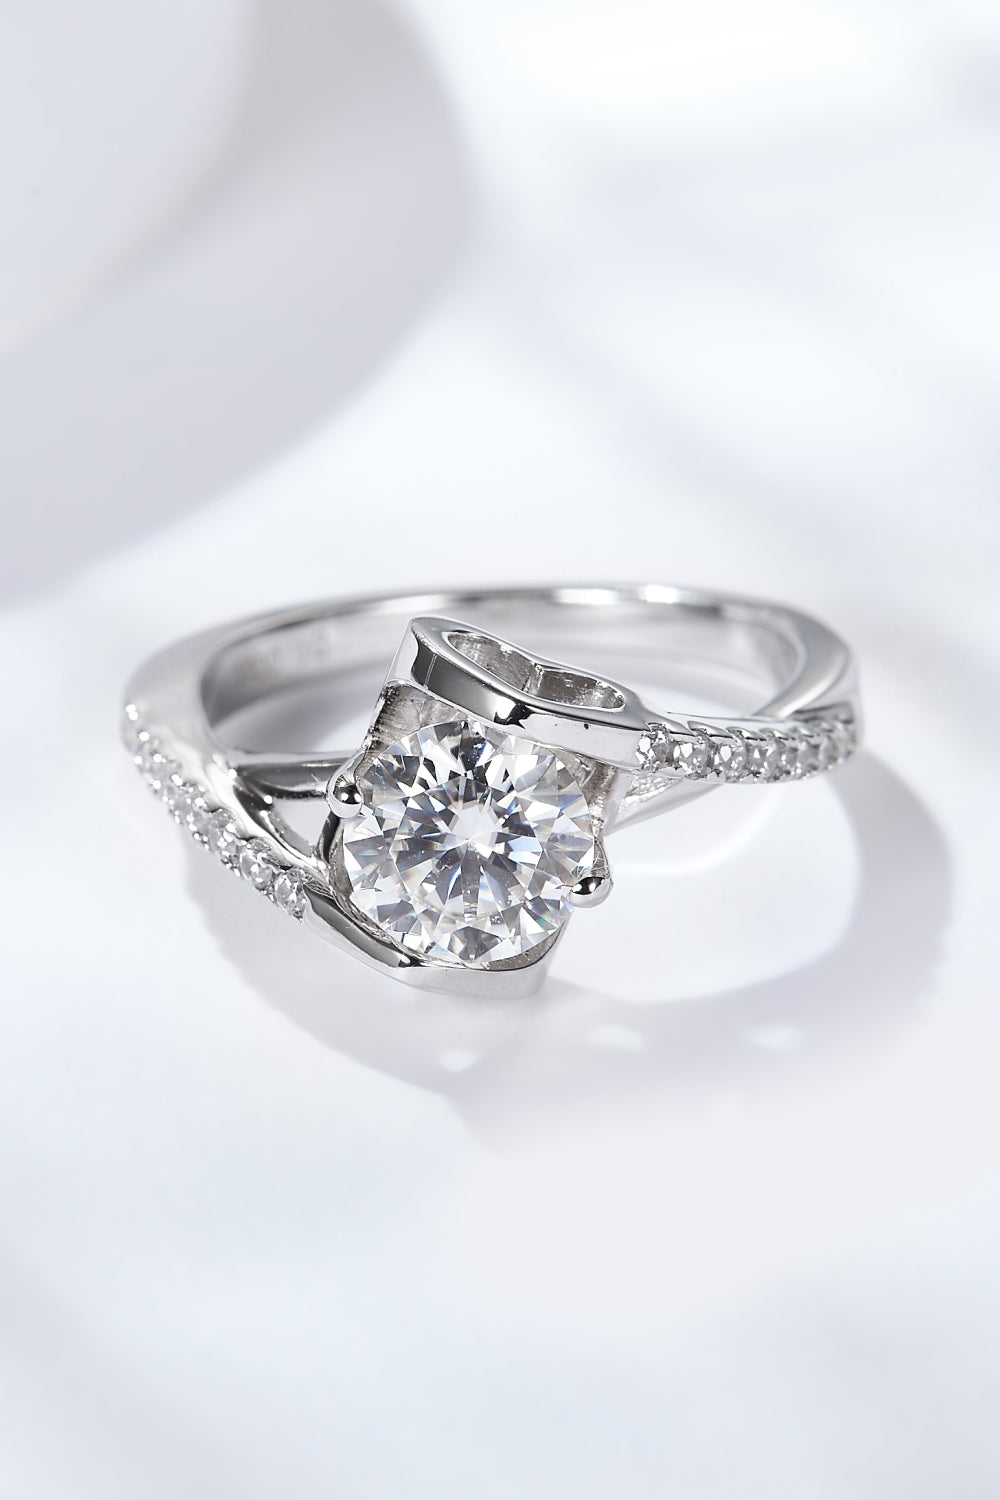 Limitless Love Platinum-Plated Moissanite Ring-Rings-Inspired by Justeen-Women's Clothing Boutique in Chicago, Illinois